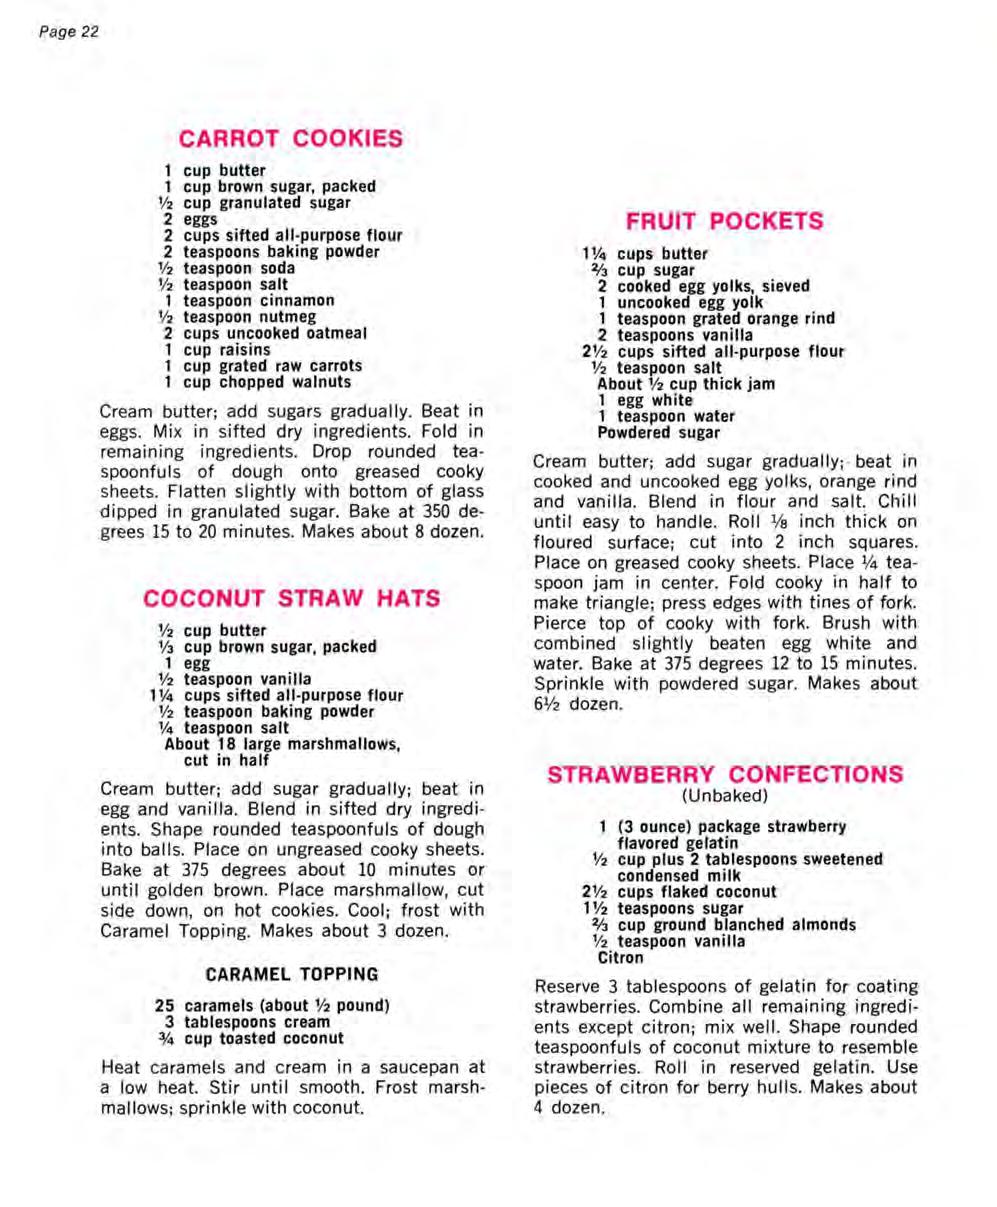 Page 22 CARROT COOKIES 1 cup brown sugar, packed Vi cup granulated sugar 2 eggs 2 cups sifted all-purpose flour 2 teaspoons baking powder 1-2 teaspoon soda '?